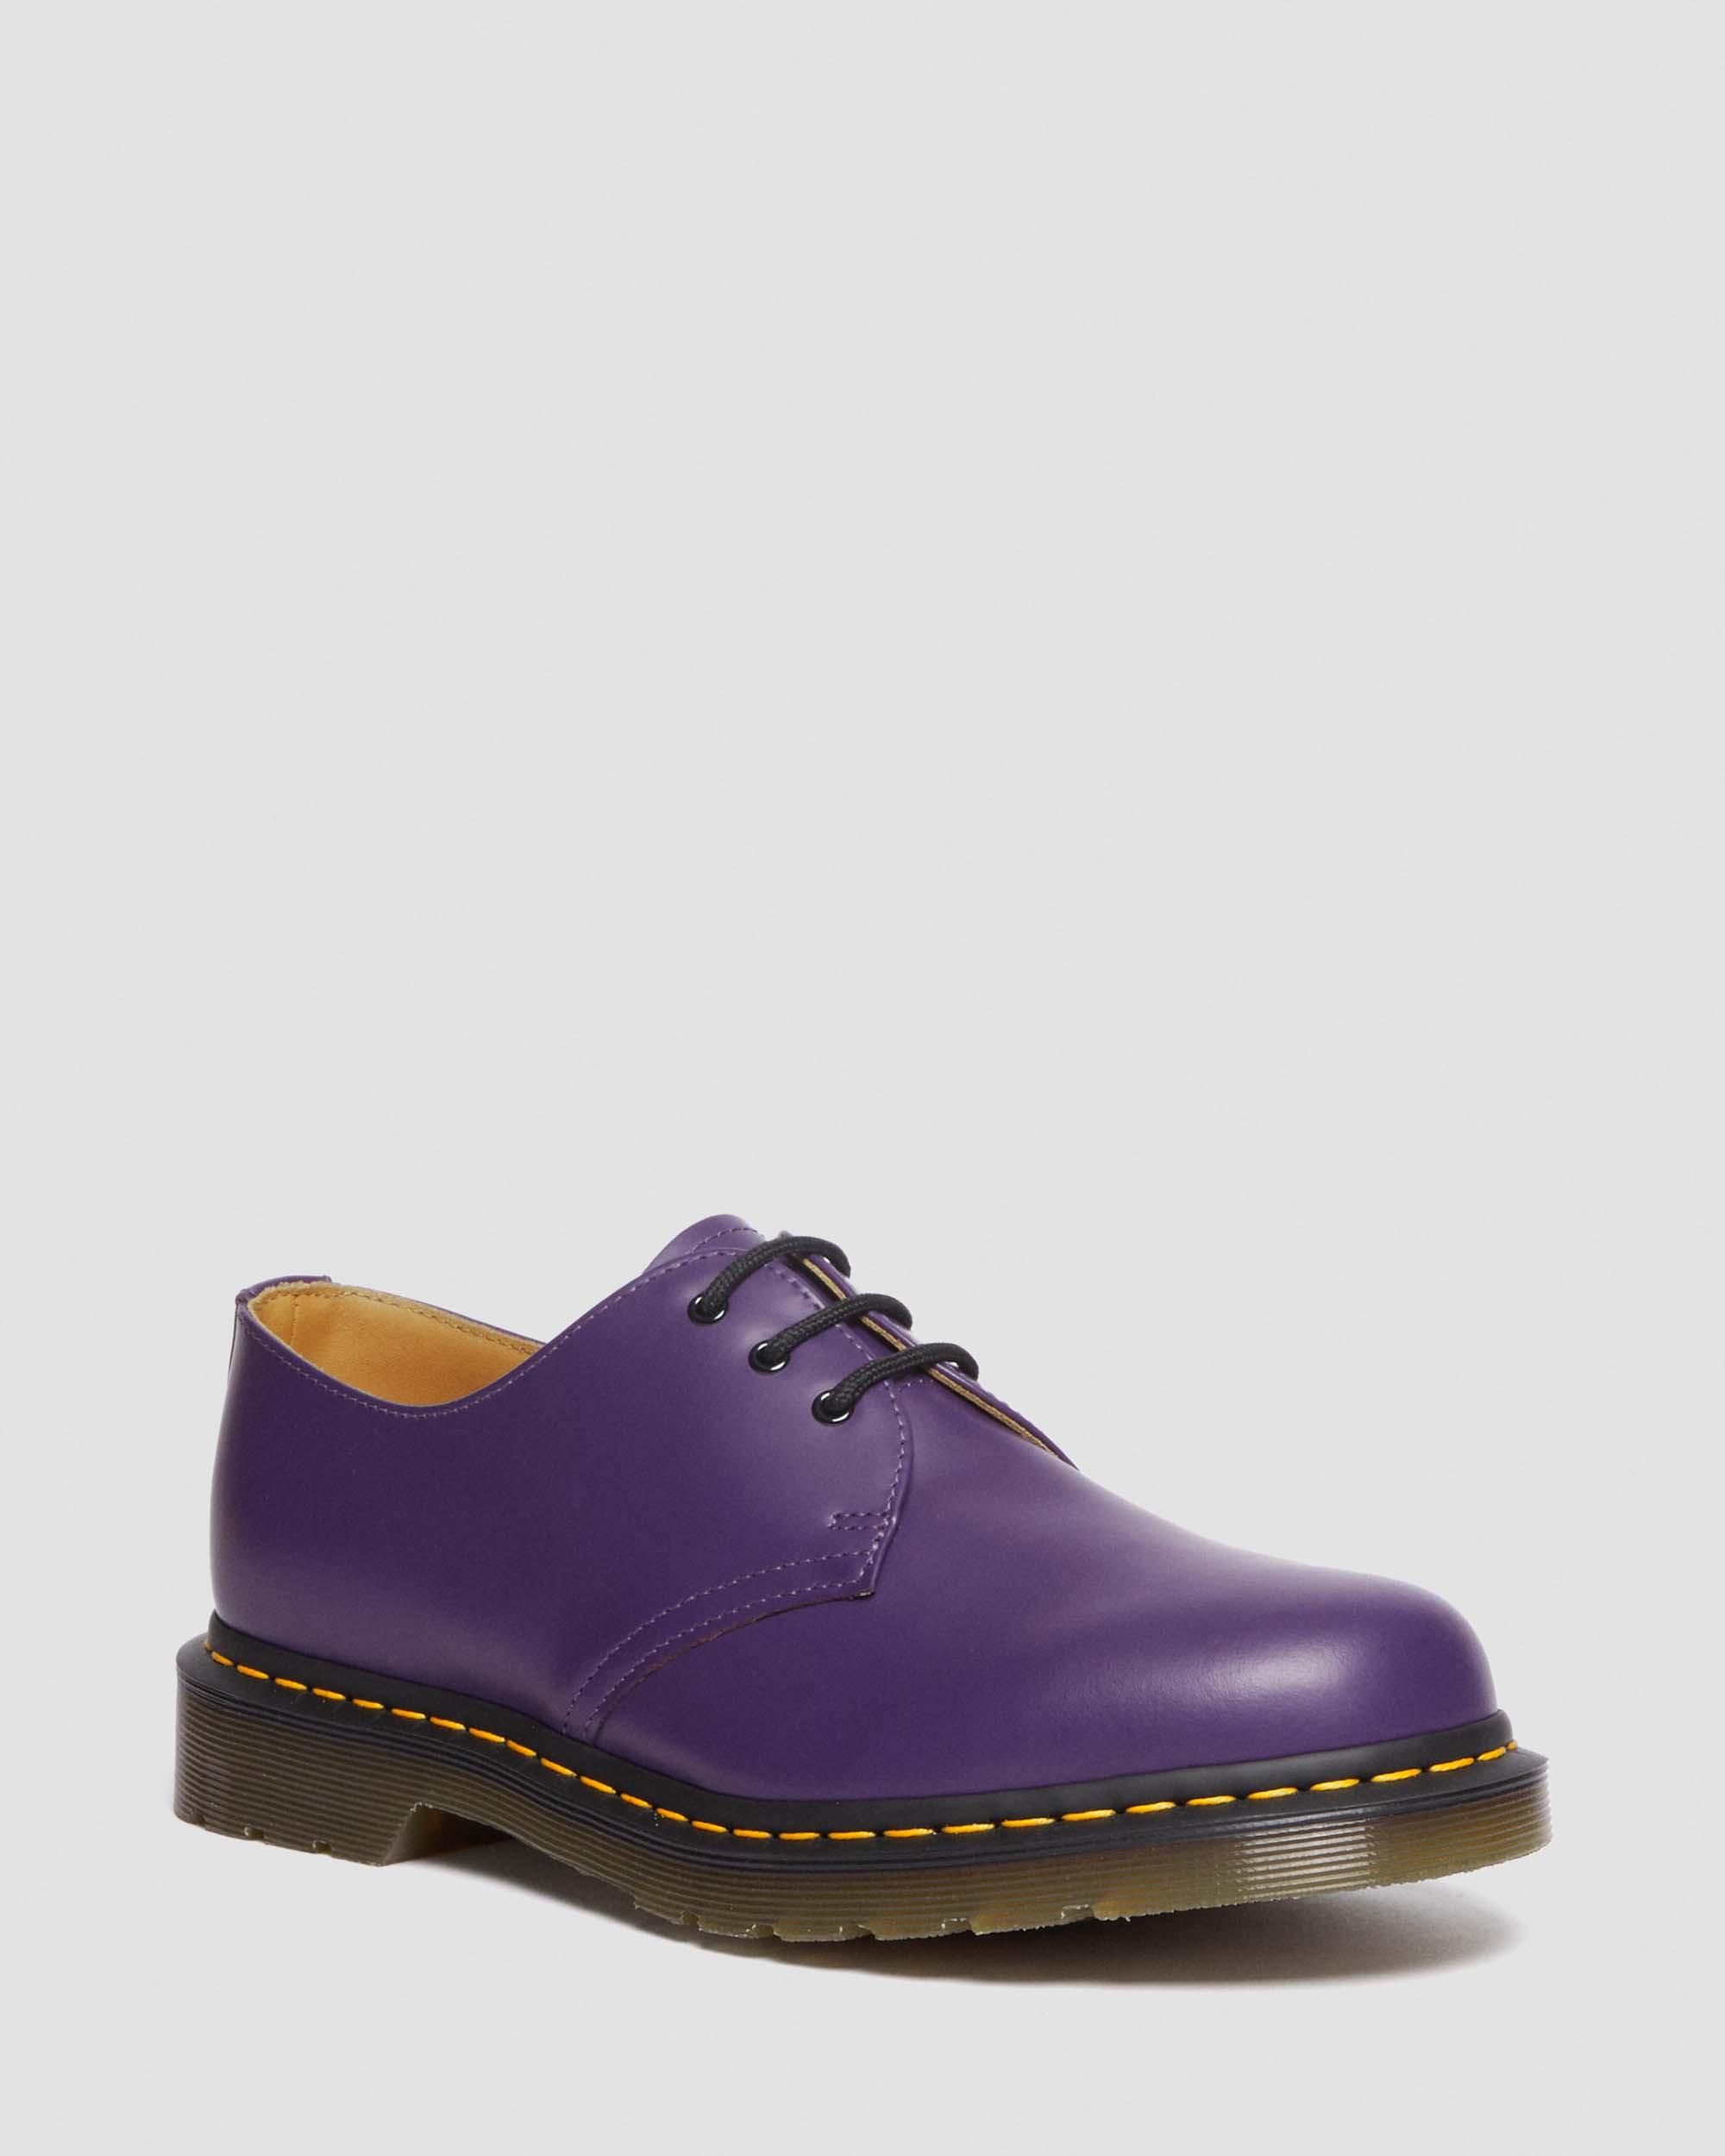 1461 Smooth Leather Oxford Shoes